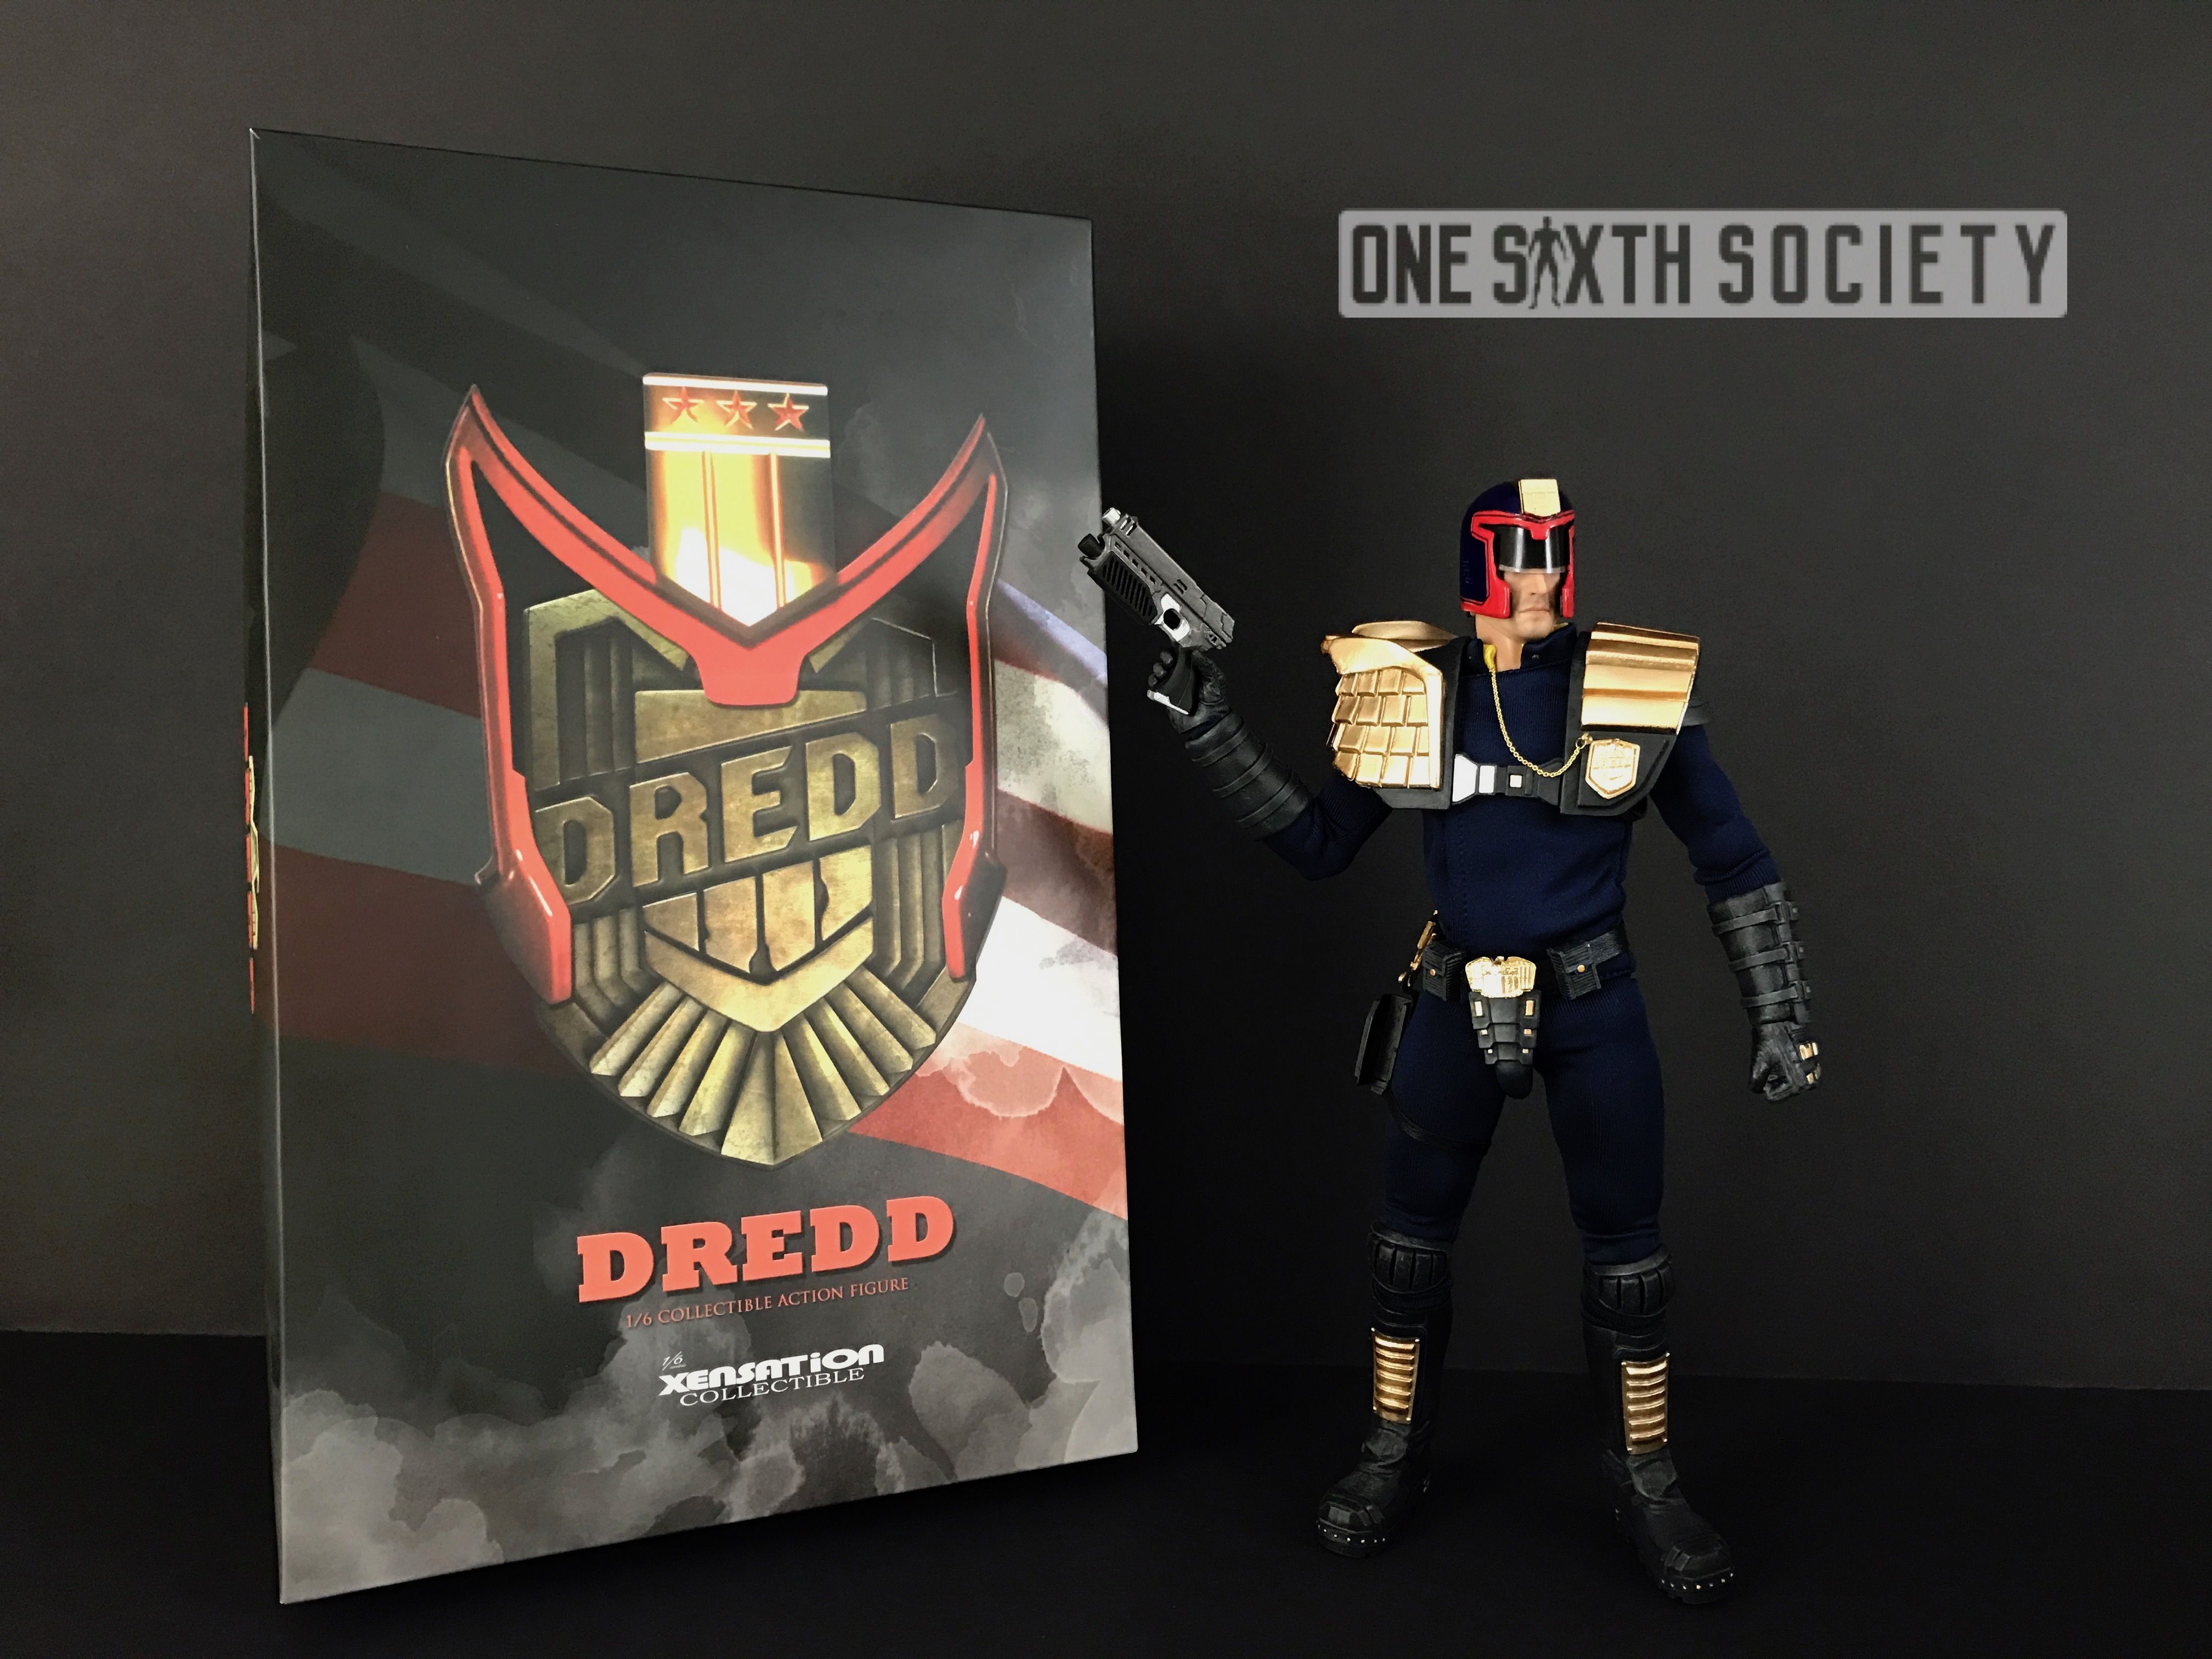 We have an excellent Unboxing and Review video for the all new Xensation Judge Dredd Figure. check it out!